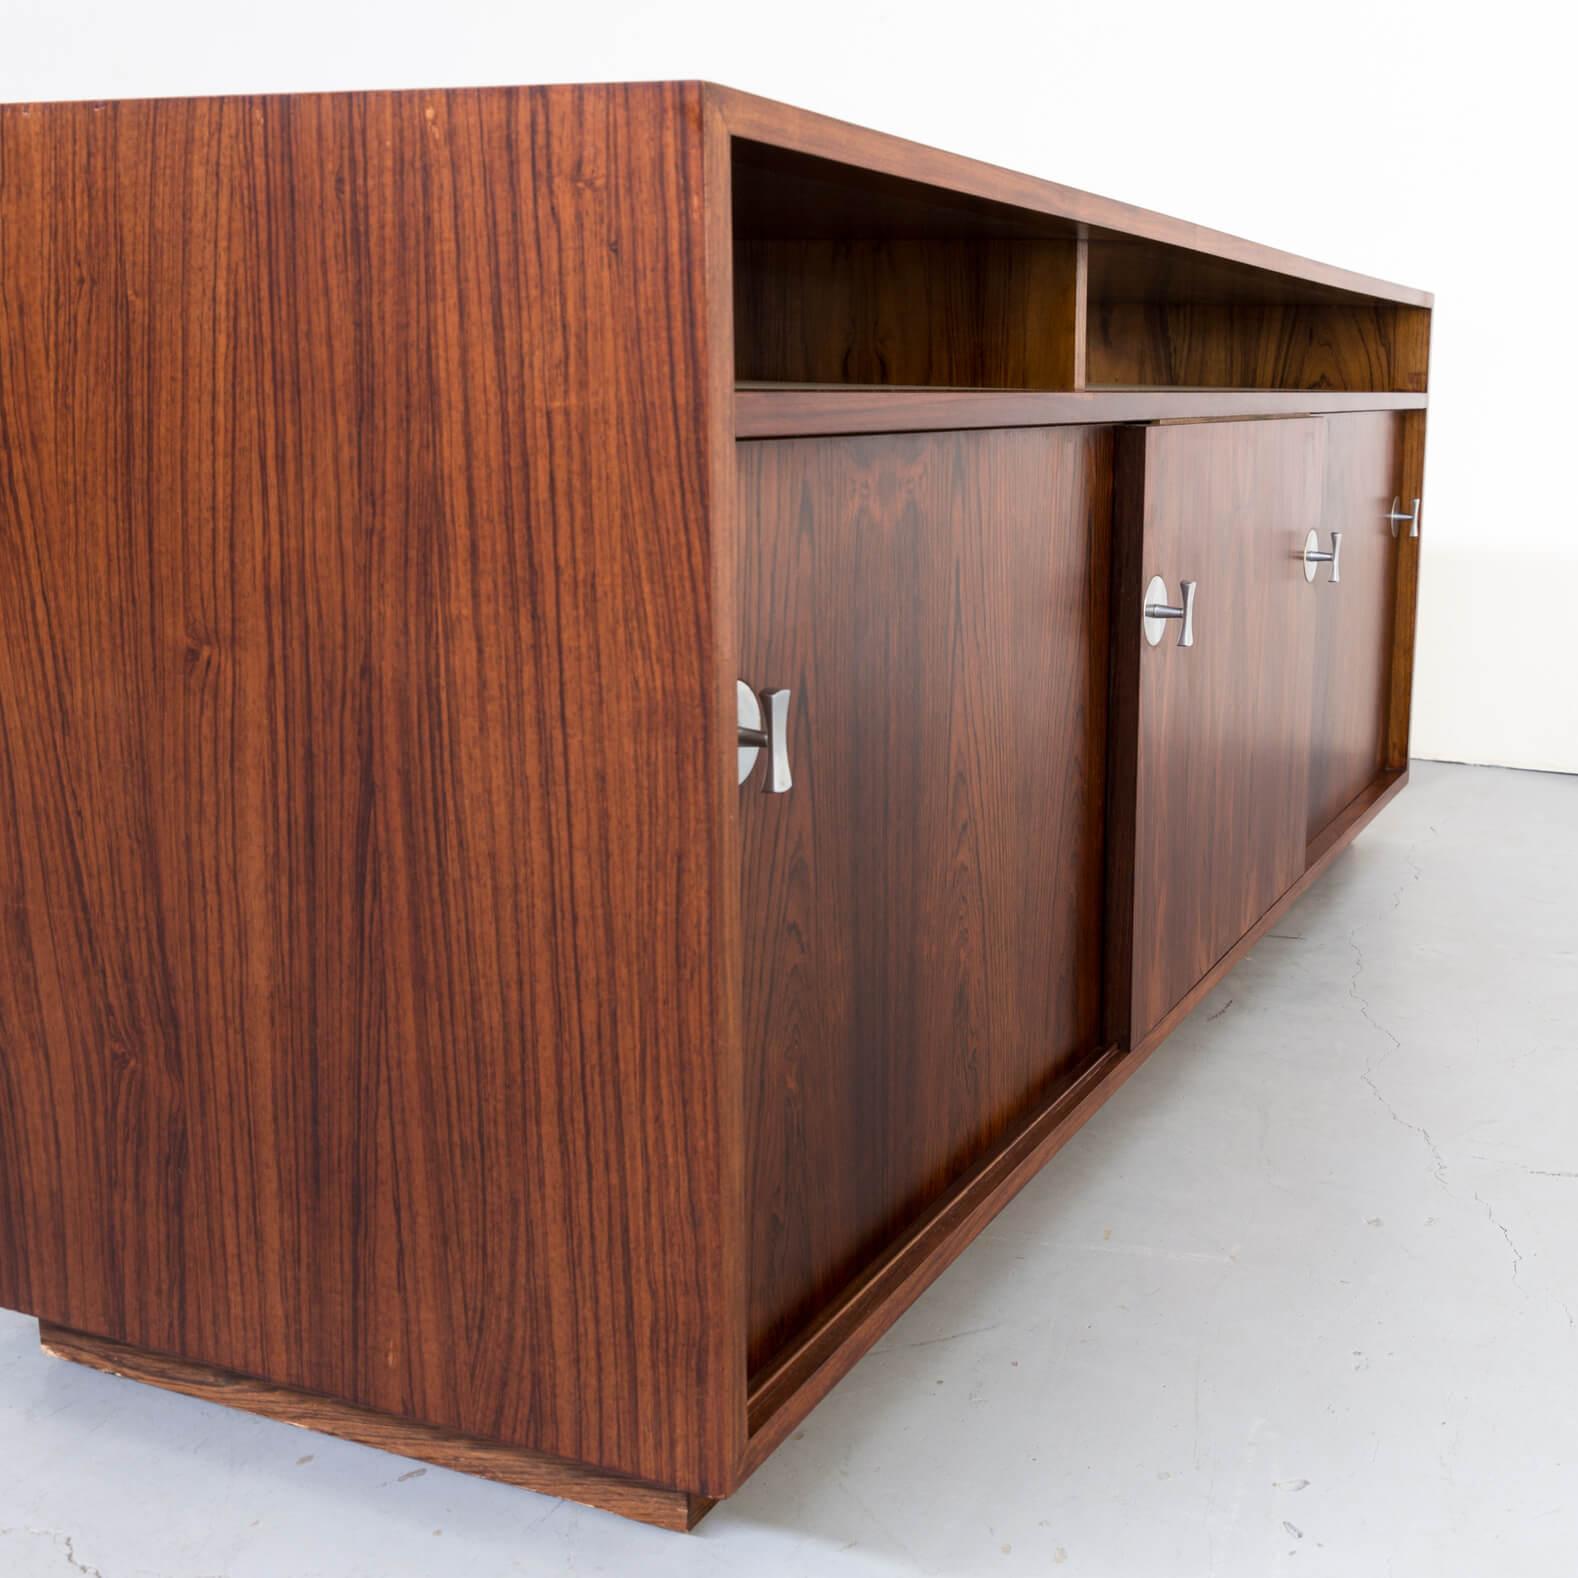 1960s Finn Juhl Rosewood Side, Lowboard from the Diplomat Series for Cado For Sale 3